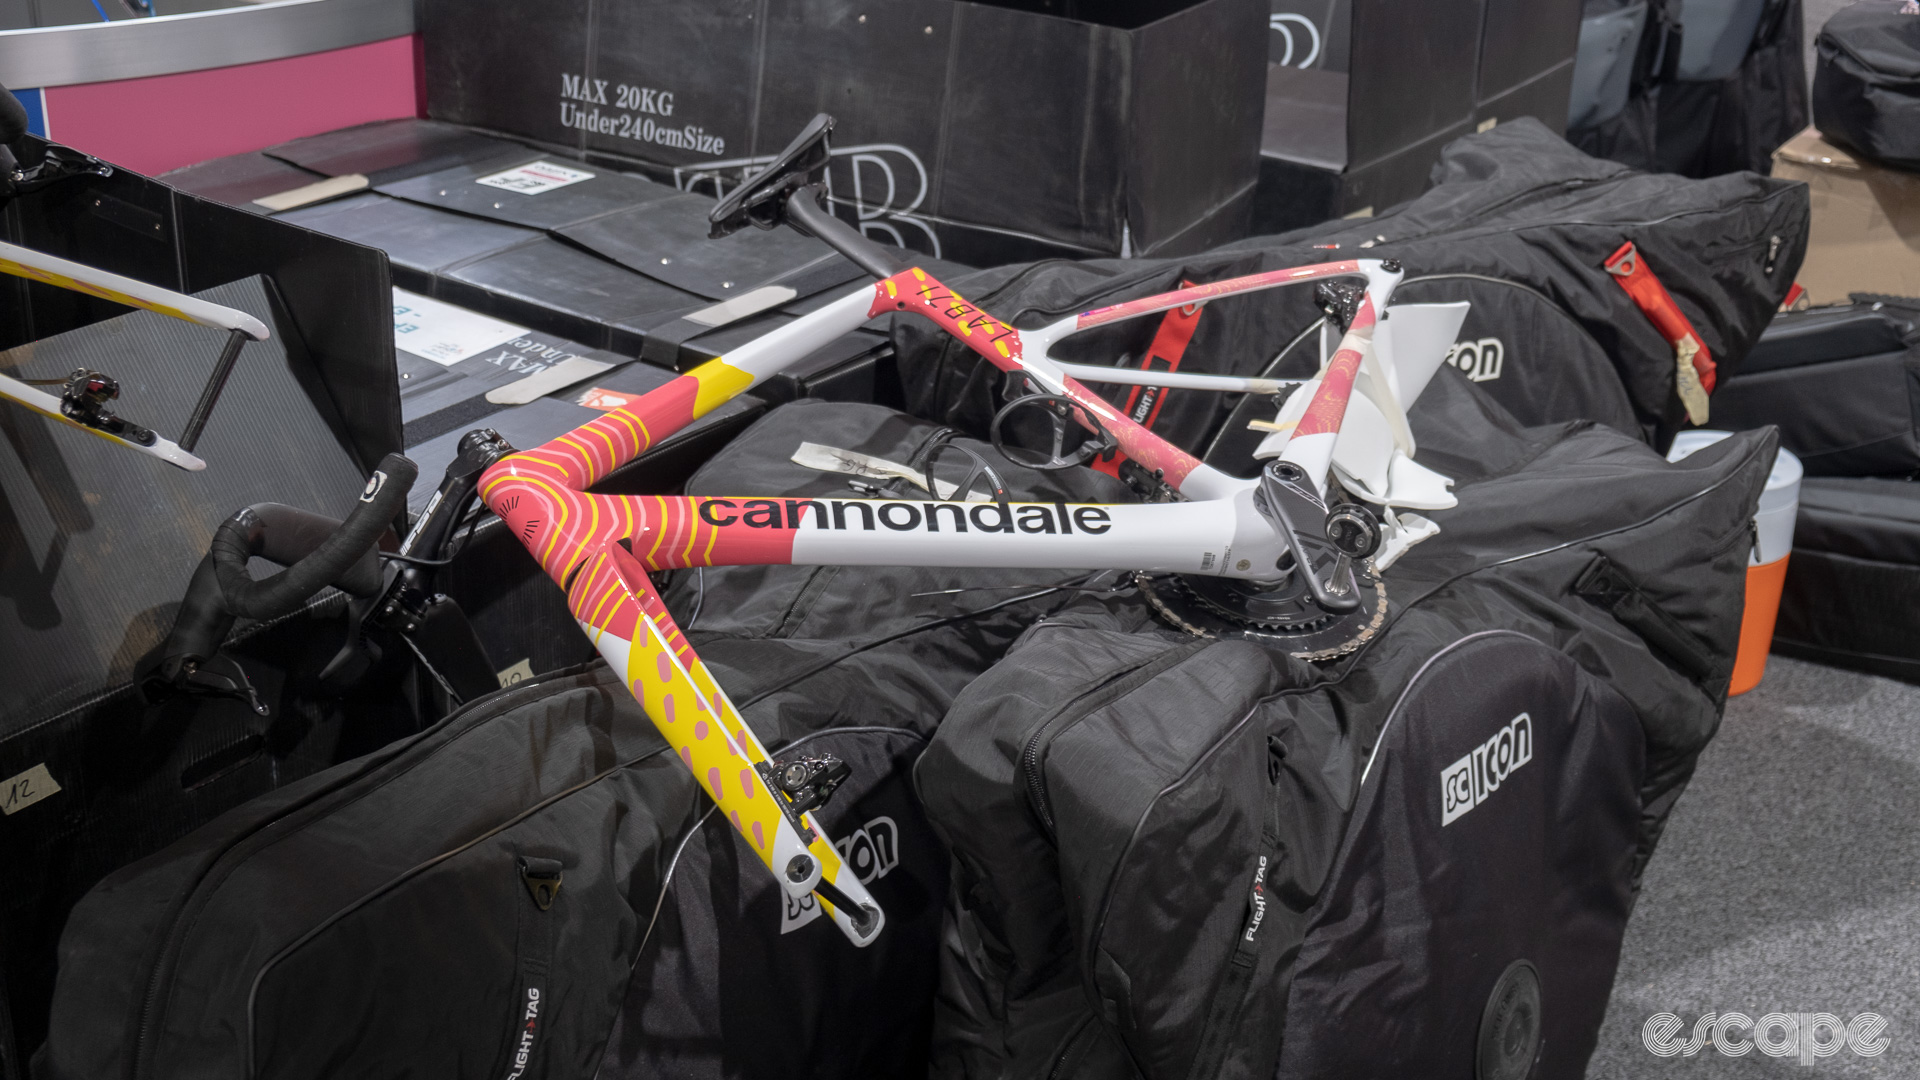 The photo shows a Cannondale waiting to be packed into a bike bag. 